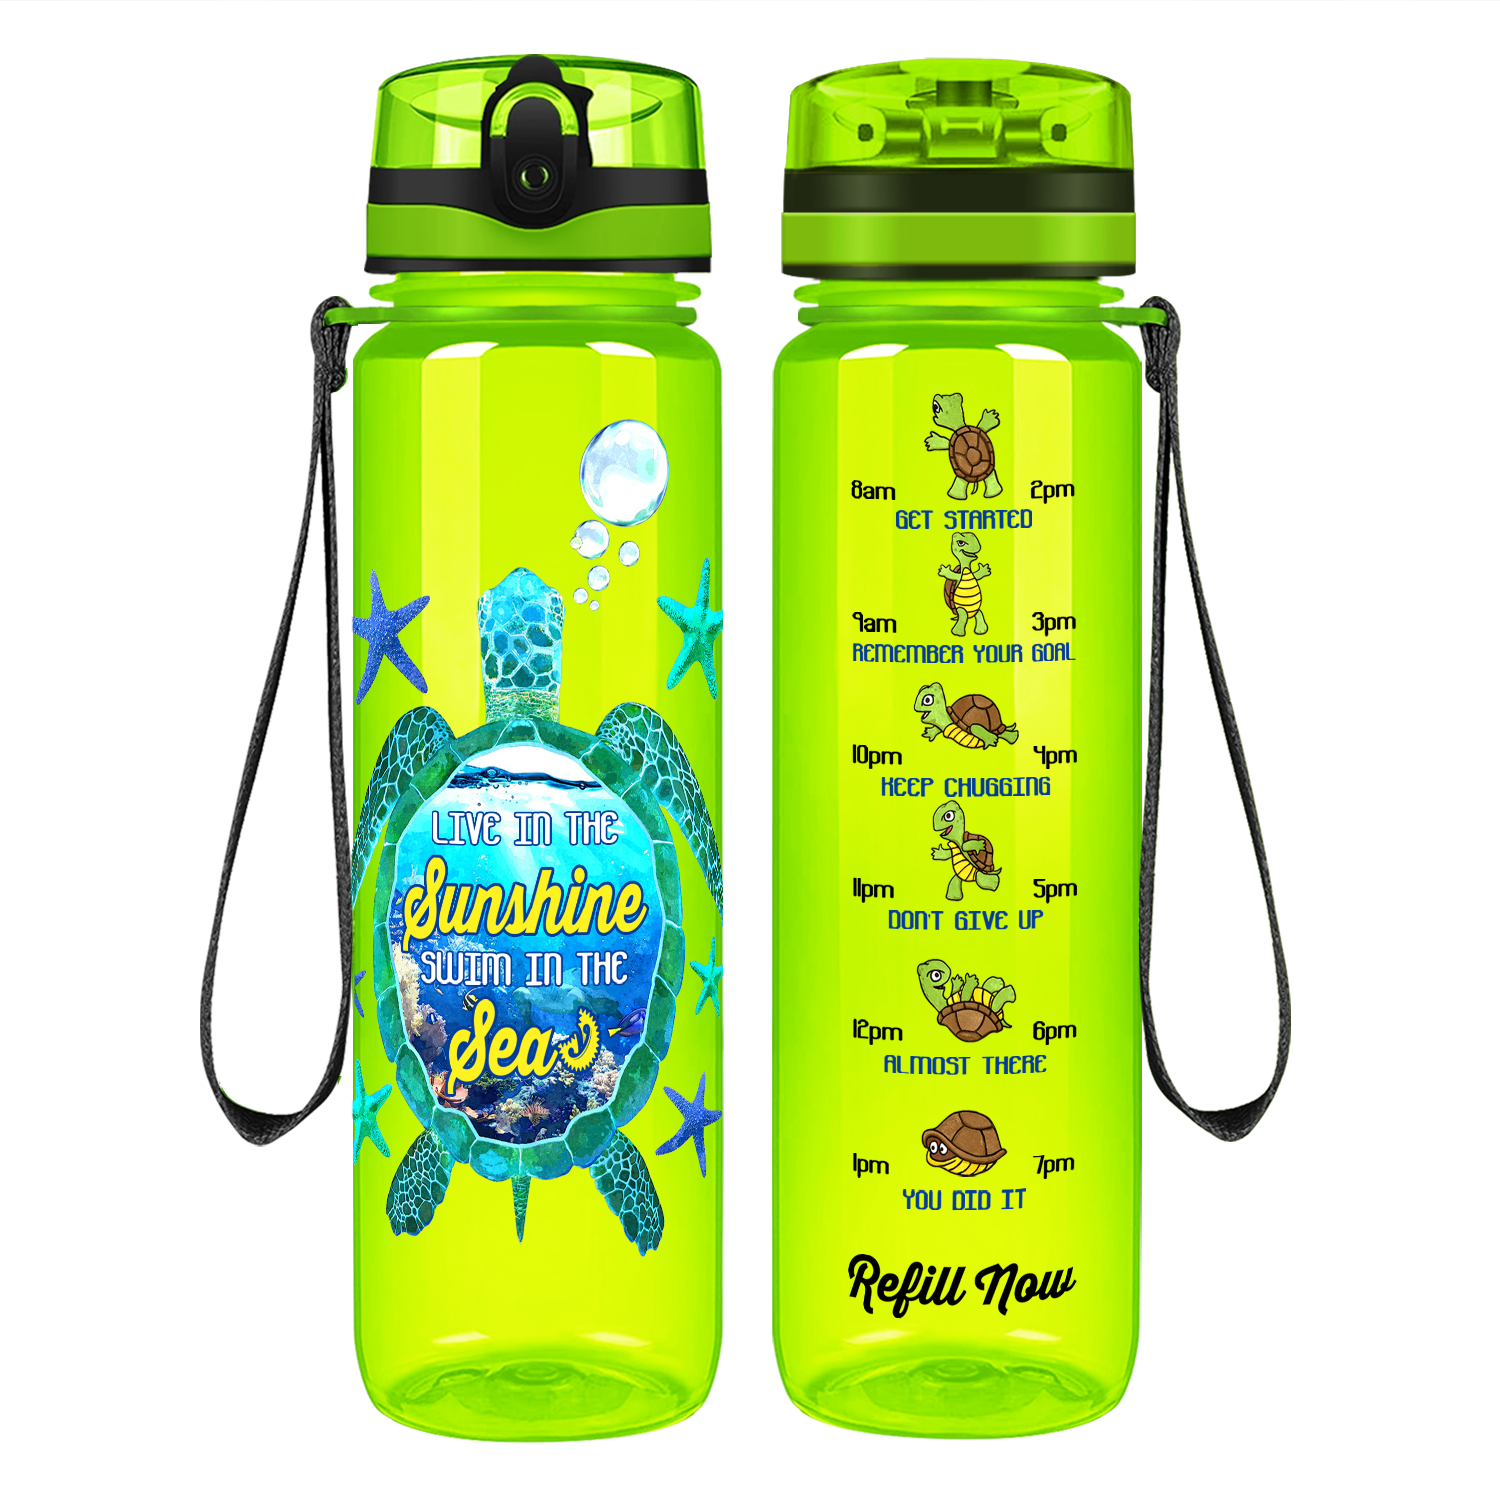 Live In The Sunshine Swim in The Sea on 32 oz Motivational Tracking Water Bottle